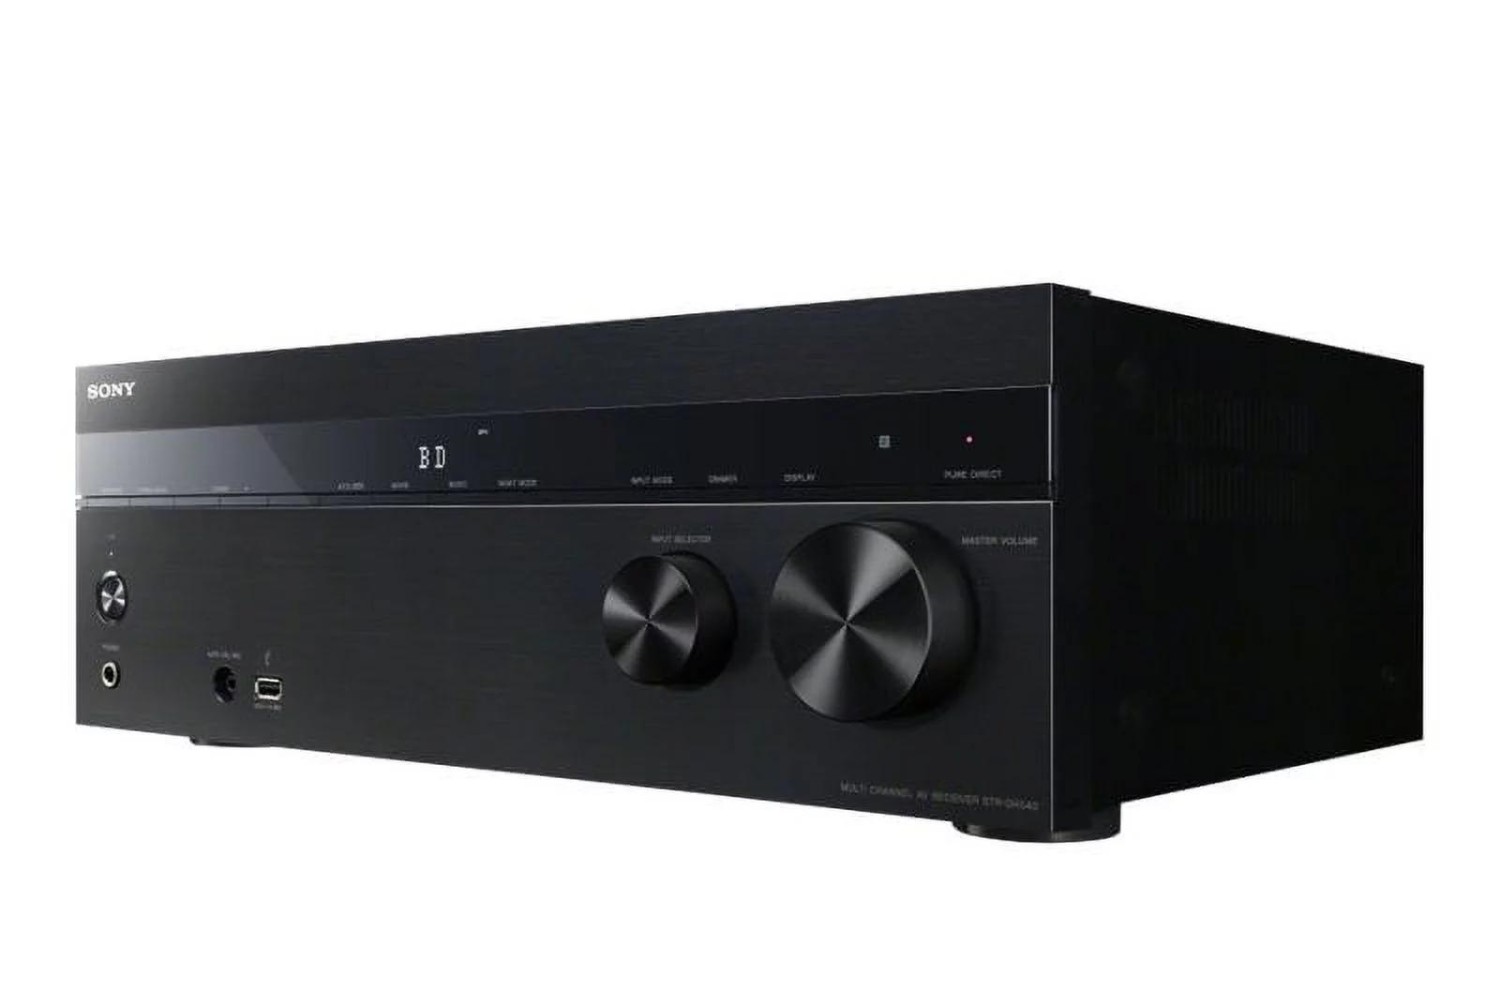 how-to-hook-up-bose-acoustimass-3-series-v-and-a-sony-str-dh540-5-2-av-receiver